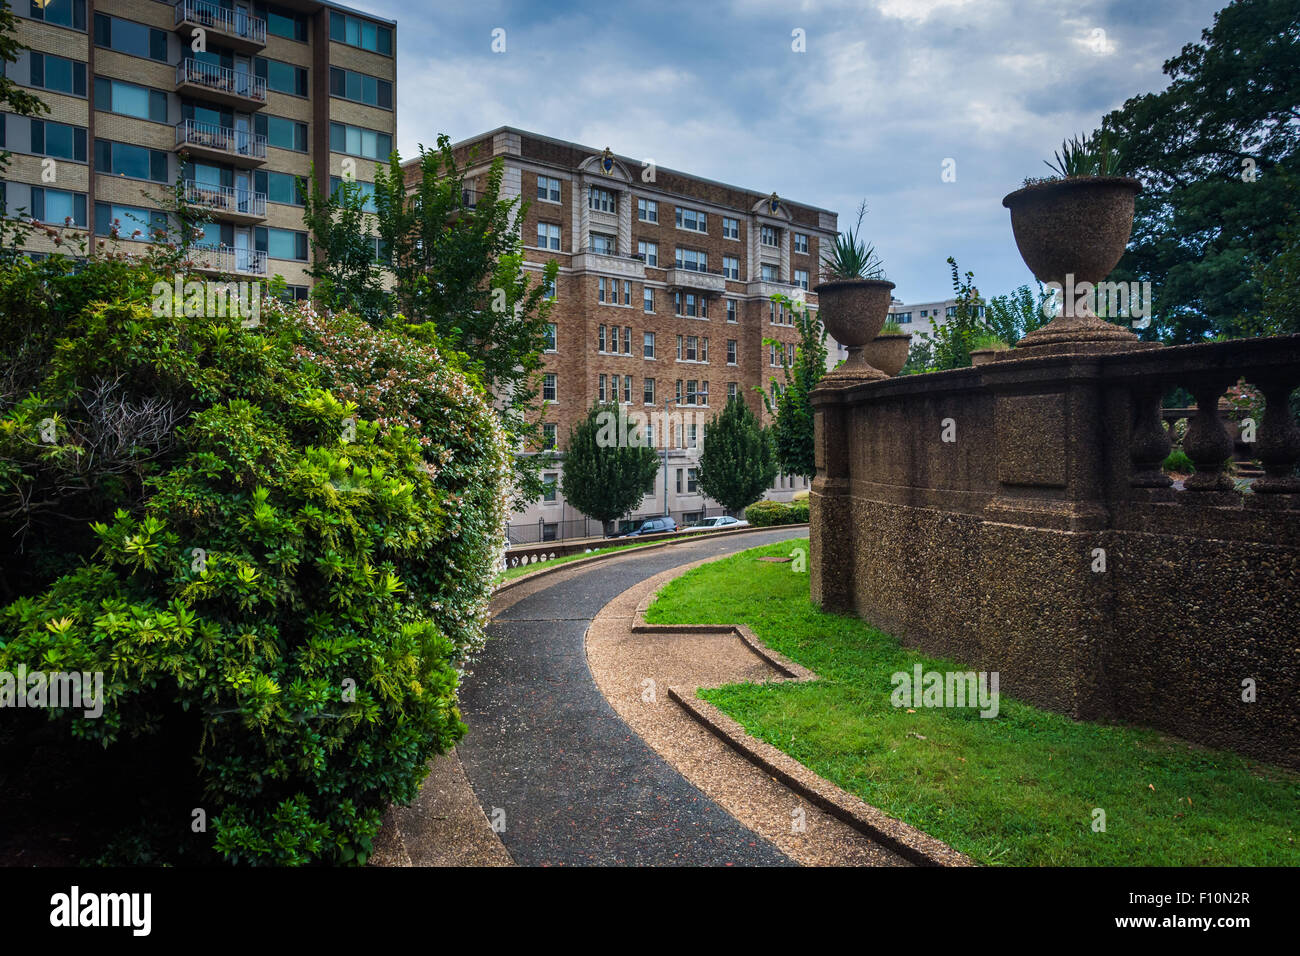 Walkway and buildings on W Street, seen at Meridian Hill Park, in Washington, DC. Stock Photo